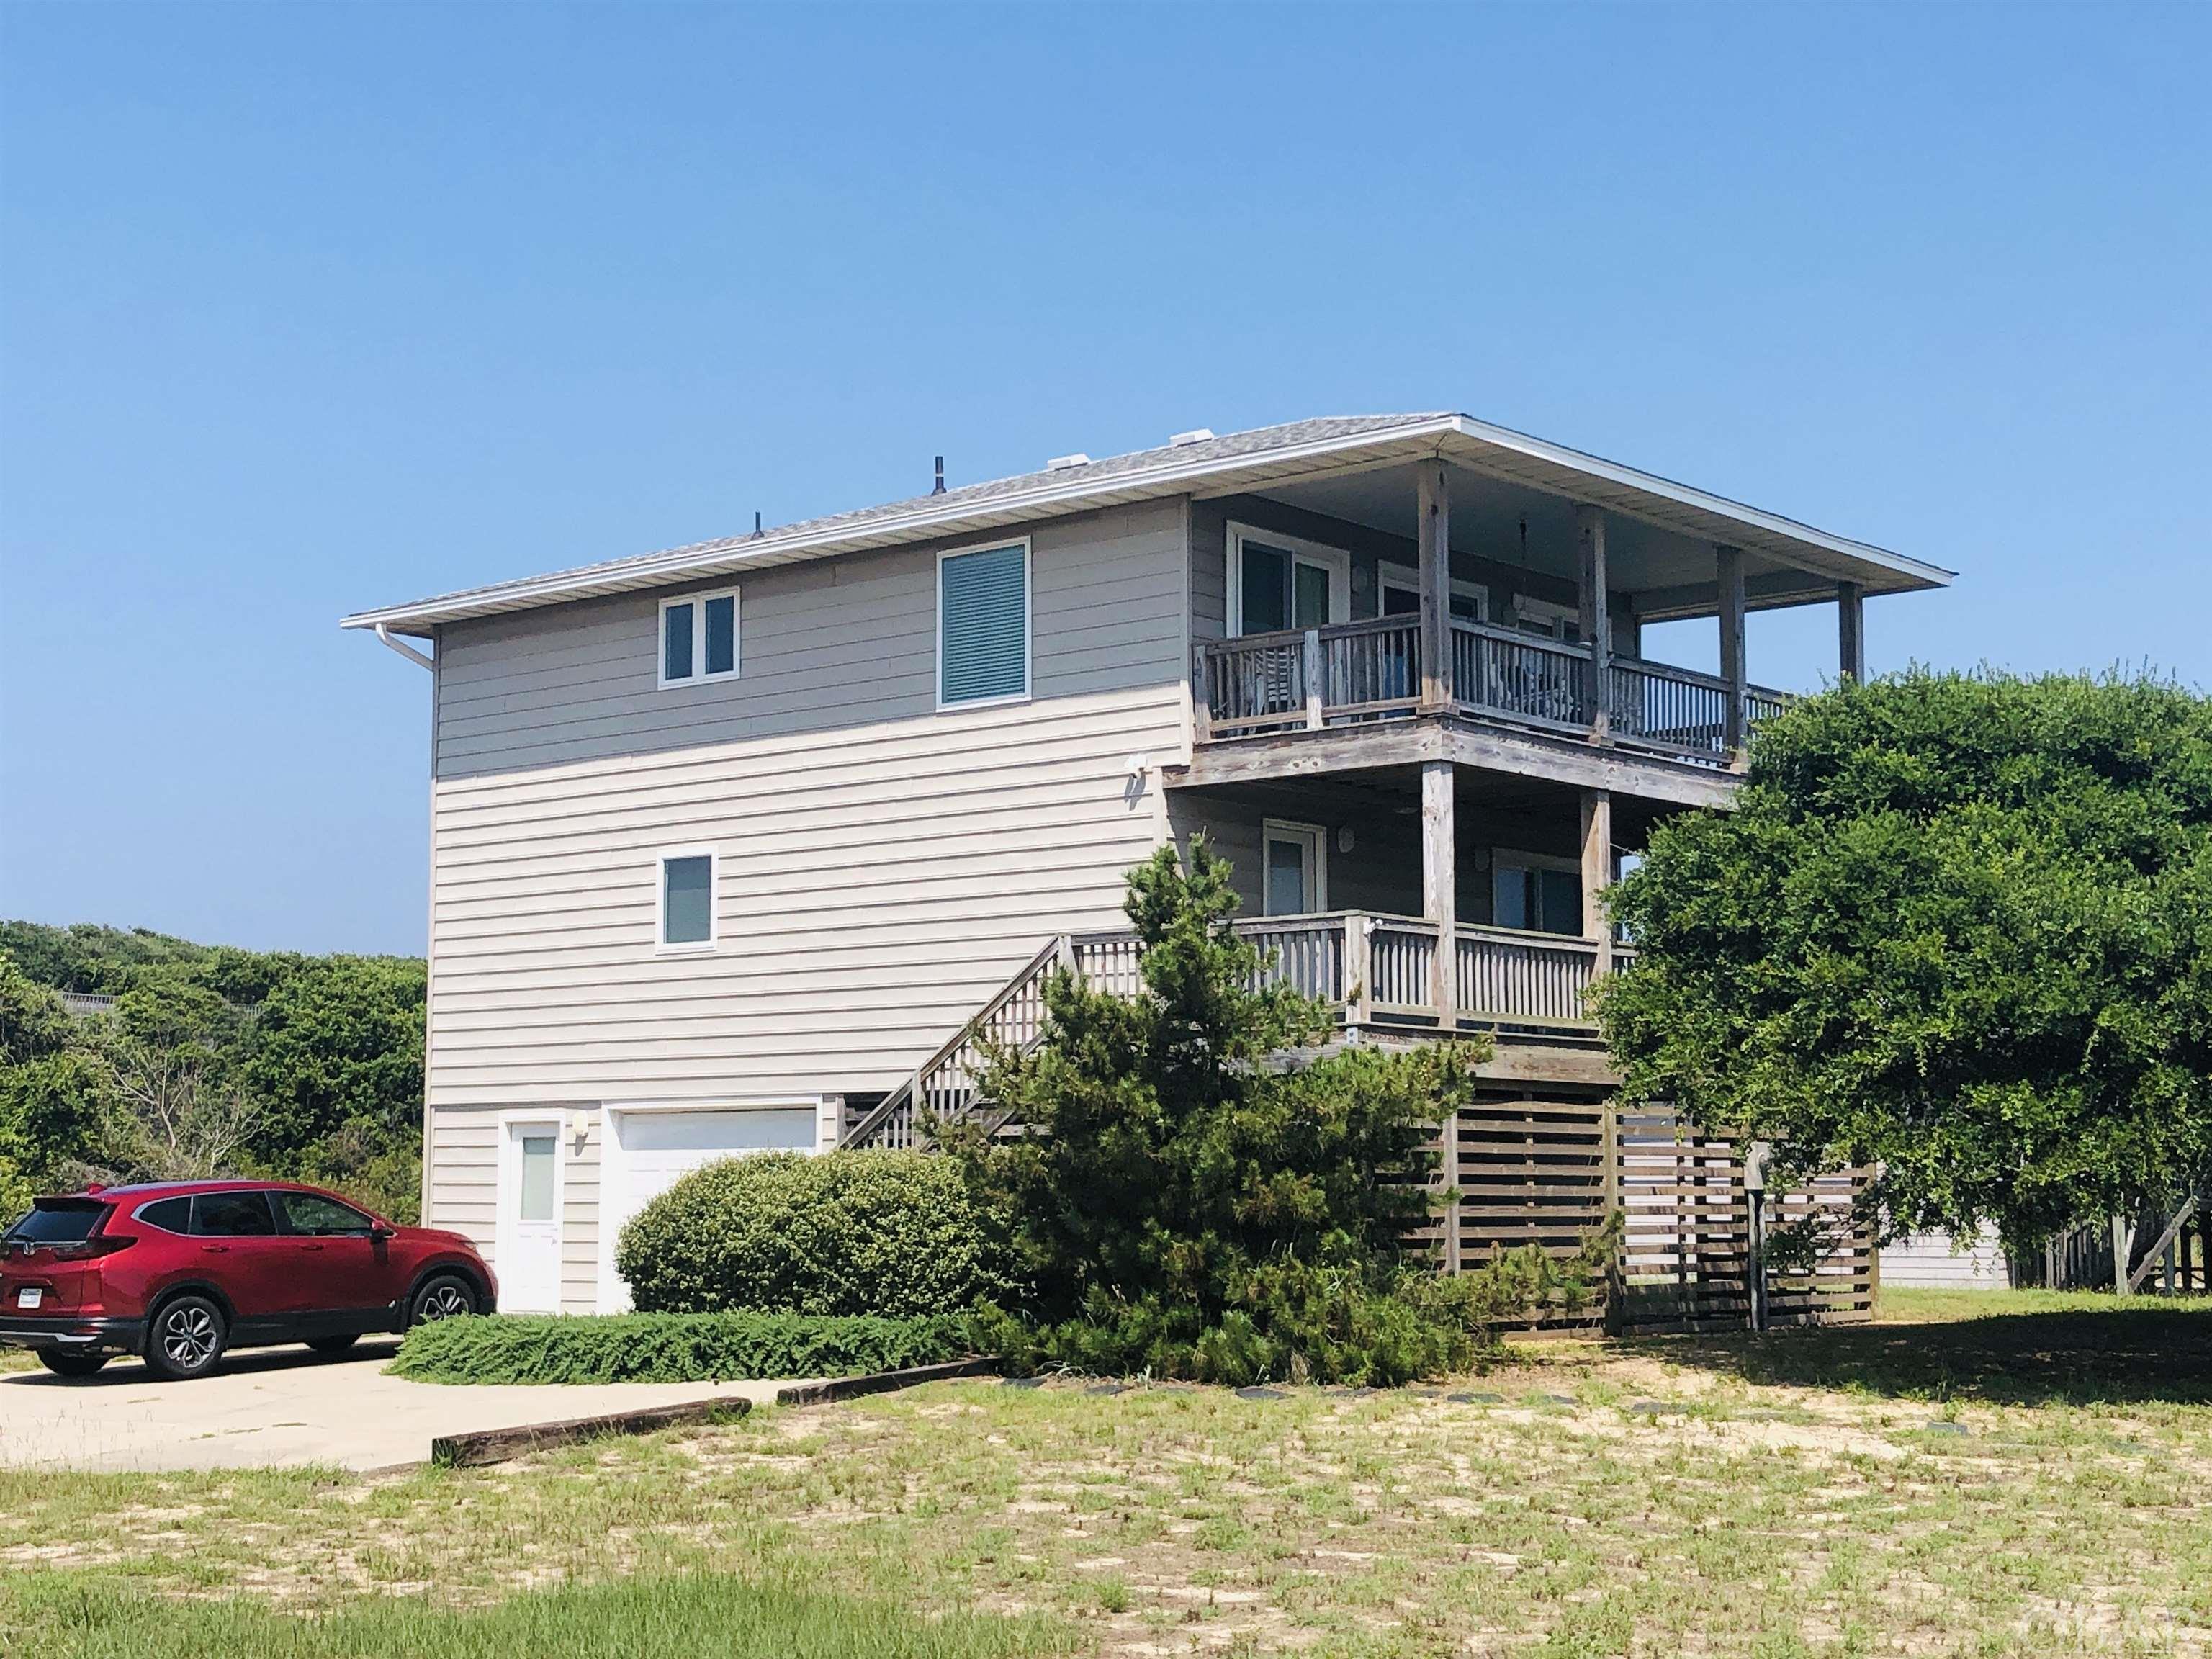 Okay Folks - Here is your chance to own a Move-in-Ready Well-Cared for Home in Oceanside Kitty Hawk with Direct Access to the Beach down Luke St (about 400 feet from the Beach Access). Comes with Million Dollar, Forever Unobstructed Panoramic Water Views down Luke Street. Less through traffic since part of Luke Street is one-way. The Home was renovated and had the back wing of the house expanded from the ground up with 390 SF of heated living space 2017, which was taken down to the studs, with the following List of Updates: Hydraulic Elevator to all floors; New Kitchen with Gorgeous Granite counters, Ceiling height White painted Wood Soft Close Cabinets & Doors, Subway Tile Backsplash and new appliances; Enlarged the upper Master Bedroom and added a Walk-in Closet and a Beautiful Ensuite with a Walk-in Shower; Large Walk-in Closets in the two rear Bedrooms on the middle floor; New 30 year Architectural Roof; New Gutters; New Windows, Sliders and Window Treatments; New HVAC units inside and out; New Septic System; New Plumbing & Water Lines throughout; Roof extension to create a covered Deck; New Flooring throughout; Rocker Panel light switches & Lever Door Handles Installed throughout; Many new fixtures throughout (ceiling fans, bathroom vanities, toilets, mirrors, towel bars, medicine cabinets & faucets); Has a Large Storage Room on the ground floor; plus added an Oversized 1 Car Garage with an automatic Garage door opener which creates a Dry Entrance. Second Floor Bathroom remodeled 2021. Water Heater replaced 12/22. Three Spacious Bedrooms on the middle Floor with a Full Hall Bathroom with Tub shared with the east Bedroom, plus the Laundry is located on this level with full-sized Washer & Dryer. Upper Level has Incredible Ocean Views, an Open Floor Plan with Sliders going out to a covered Deck, a Half Bath, a Beautiful Fully renovated modern Kitchen, and a Large Bedroom w/Ensuite and 3 Large Closets. Large 15,000 SF Lot should accommodate a 12' by 24' pool. So close to the Beach yet located in a No Flood "X" Zone. Used a primary home for over 20 years withs loads of storage - closets and more closets. One Closet in NW Bedroom is large enough to possibly turn into a 2nd Ensuite. Garage could be turned into a Game Room.